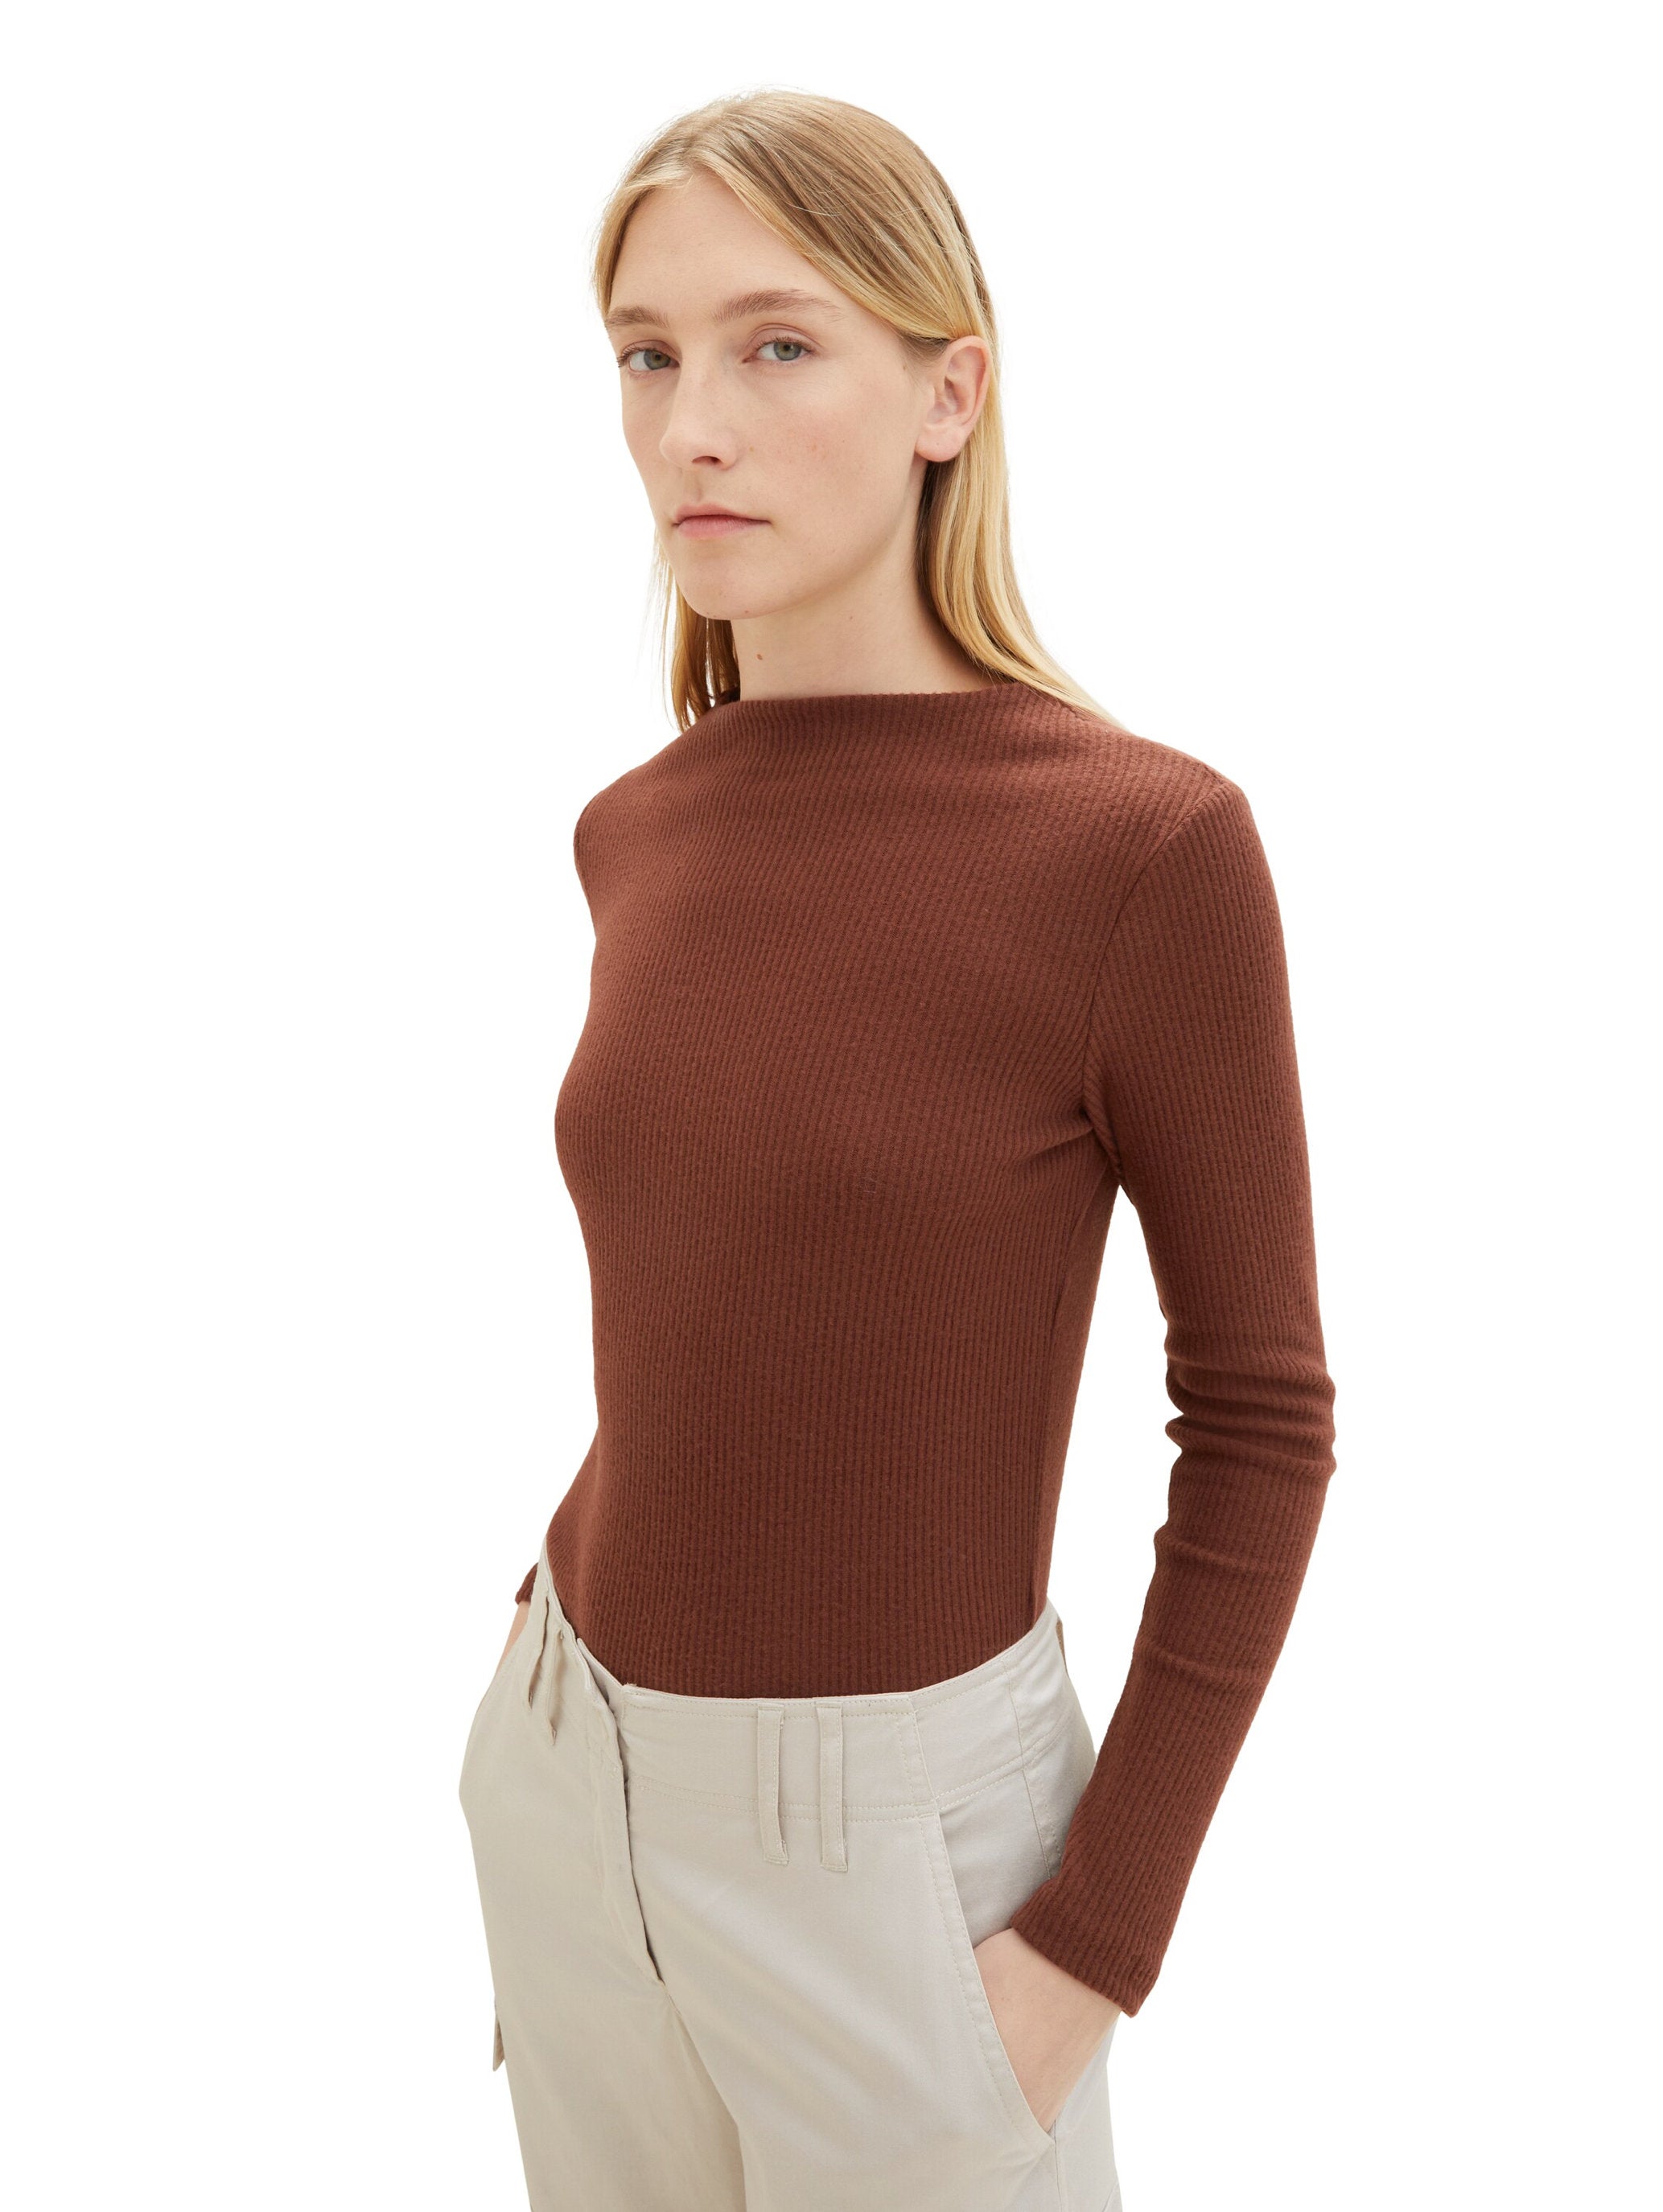 Long Sleeve T Shirt With Round Neckline_1038165_30337_02